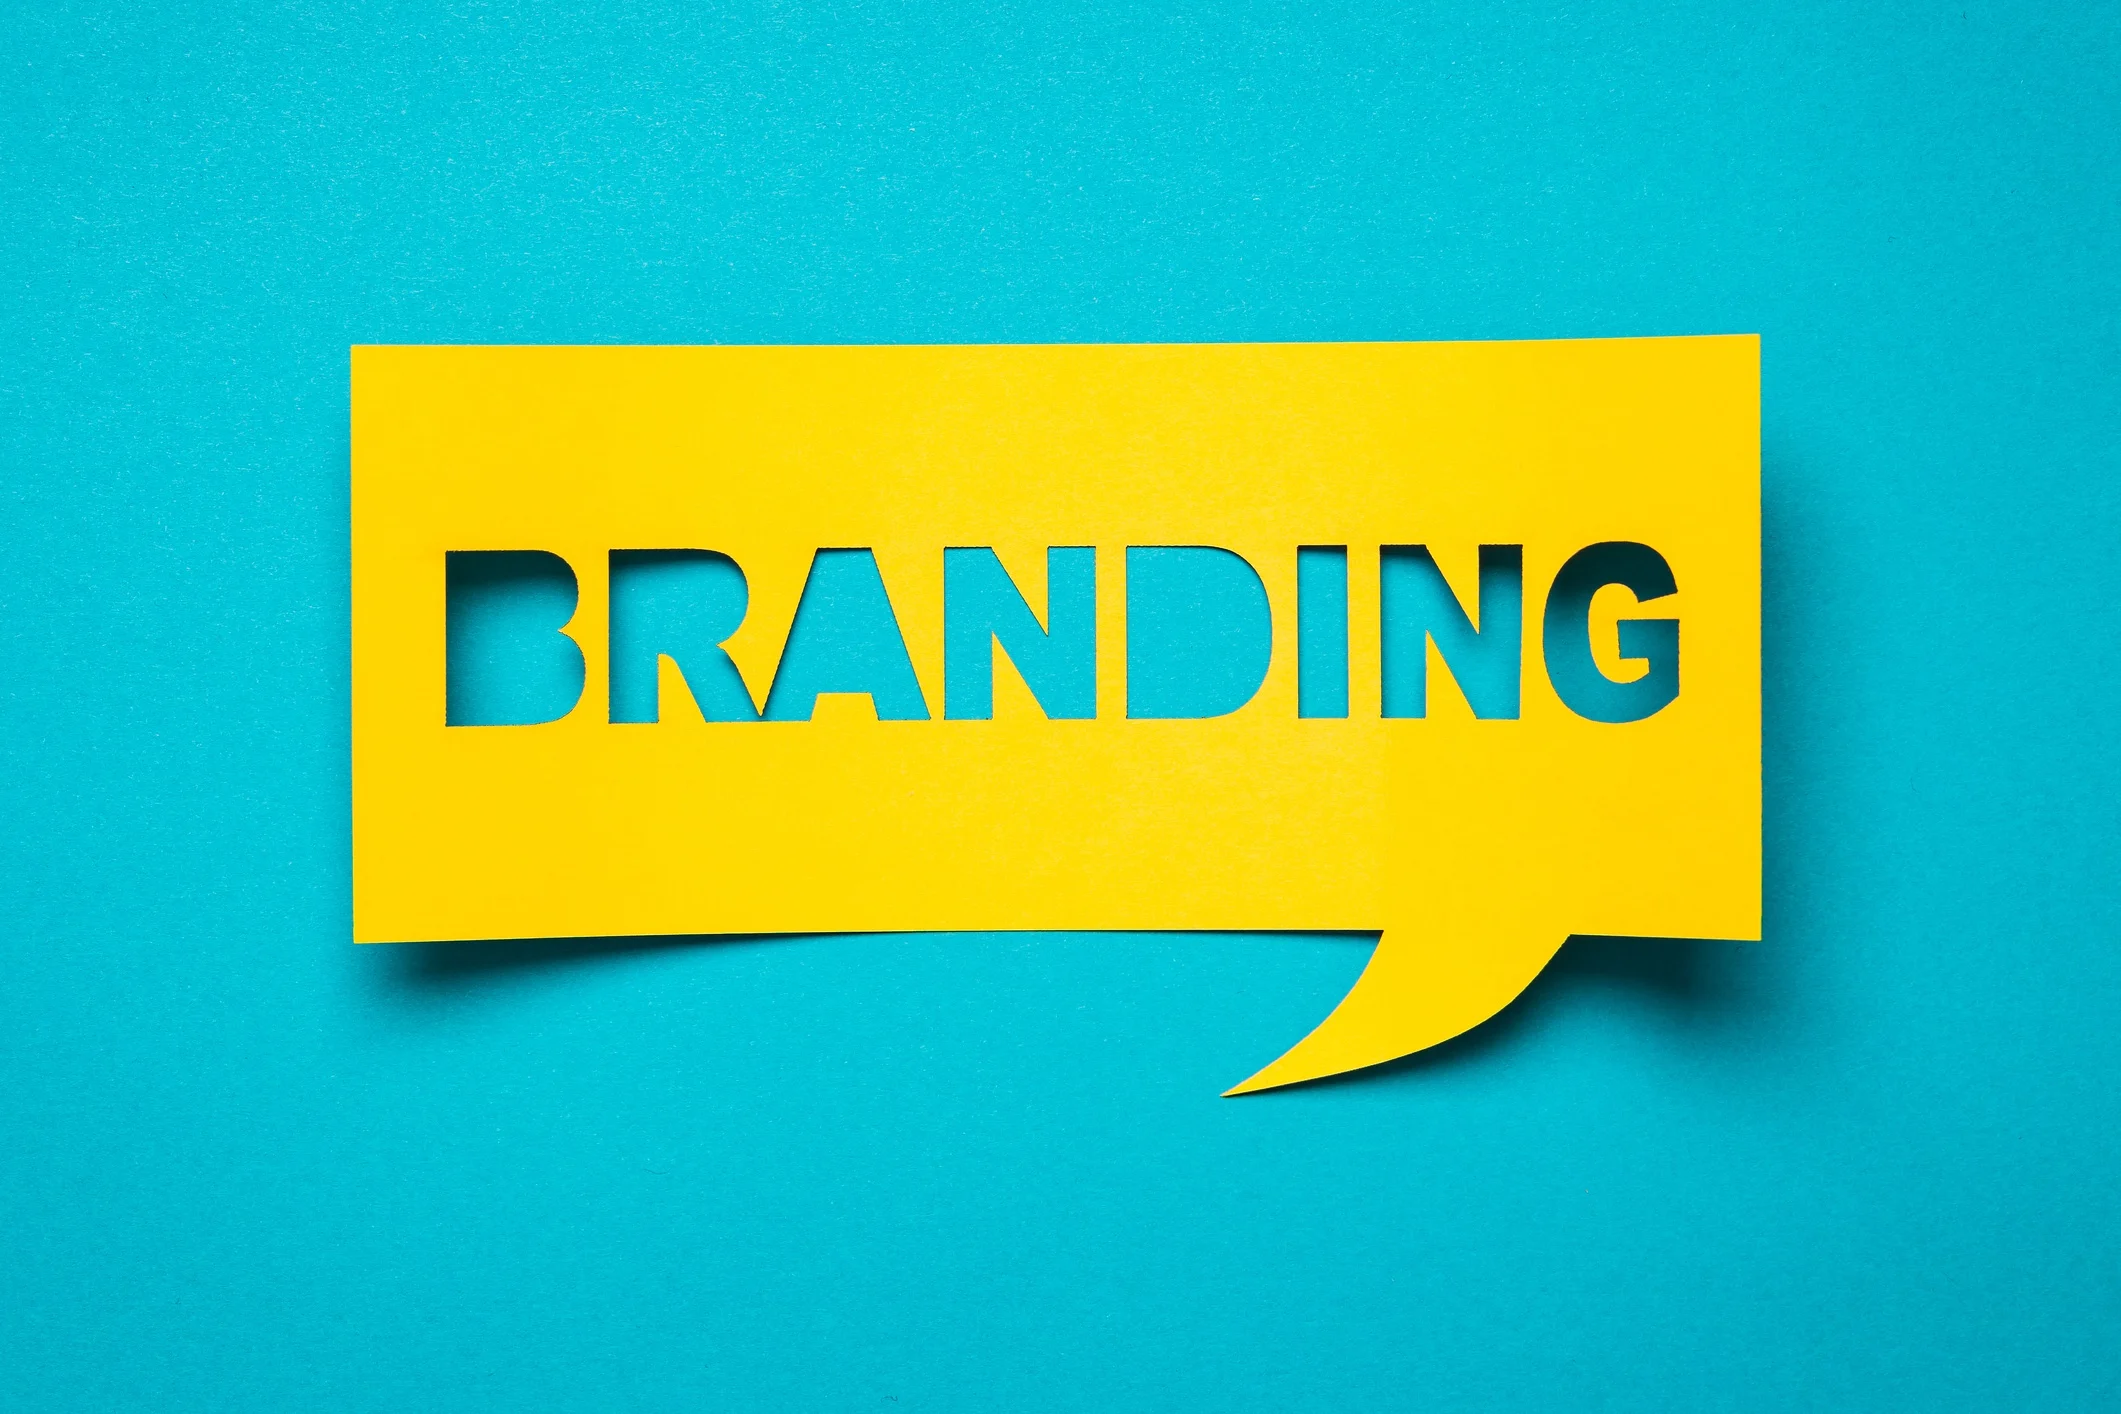 Branding note on a blue green background